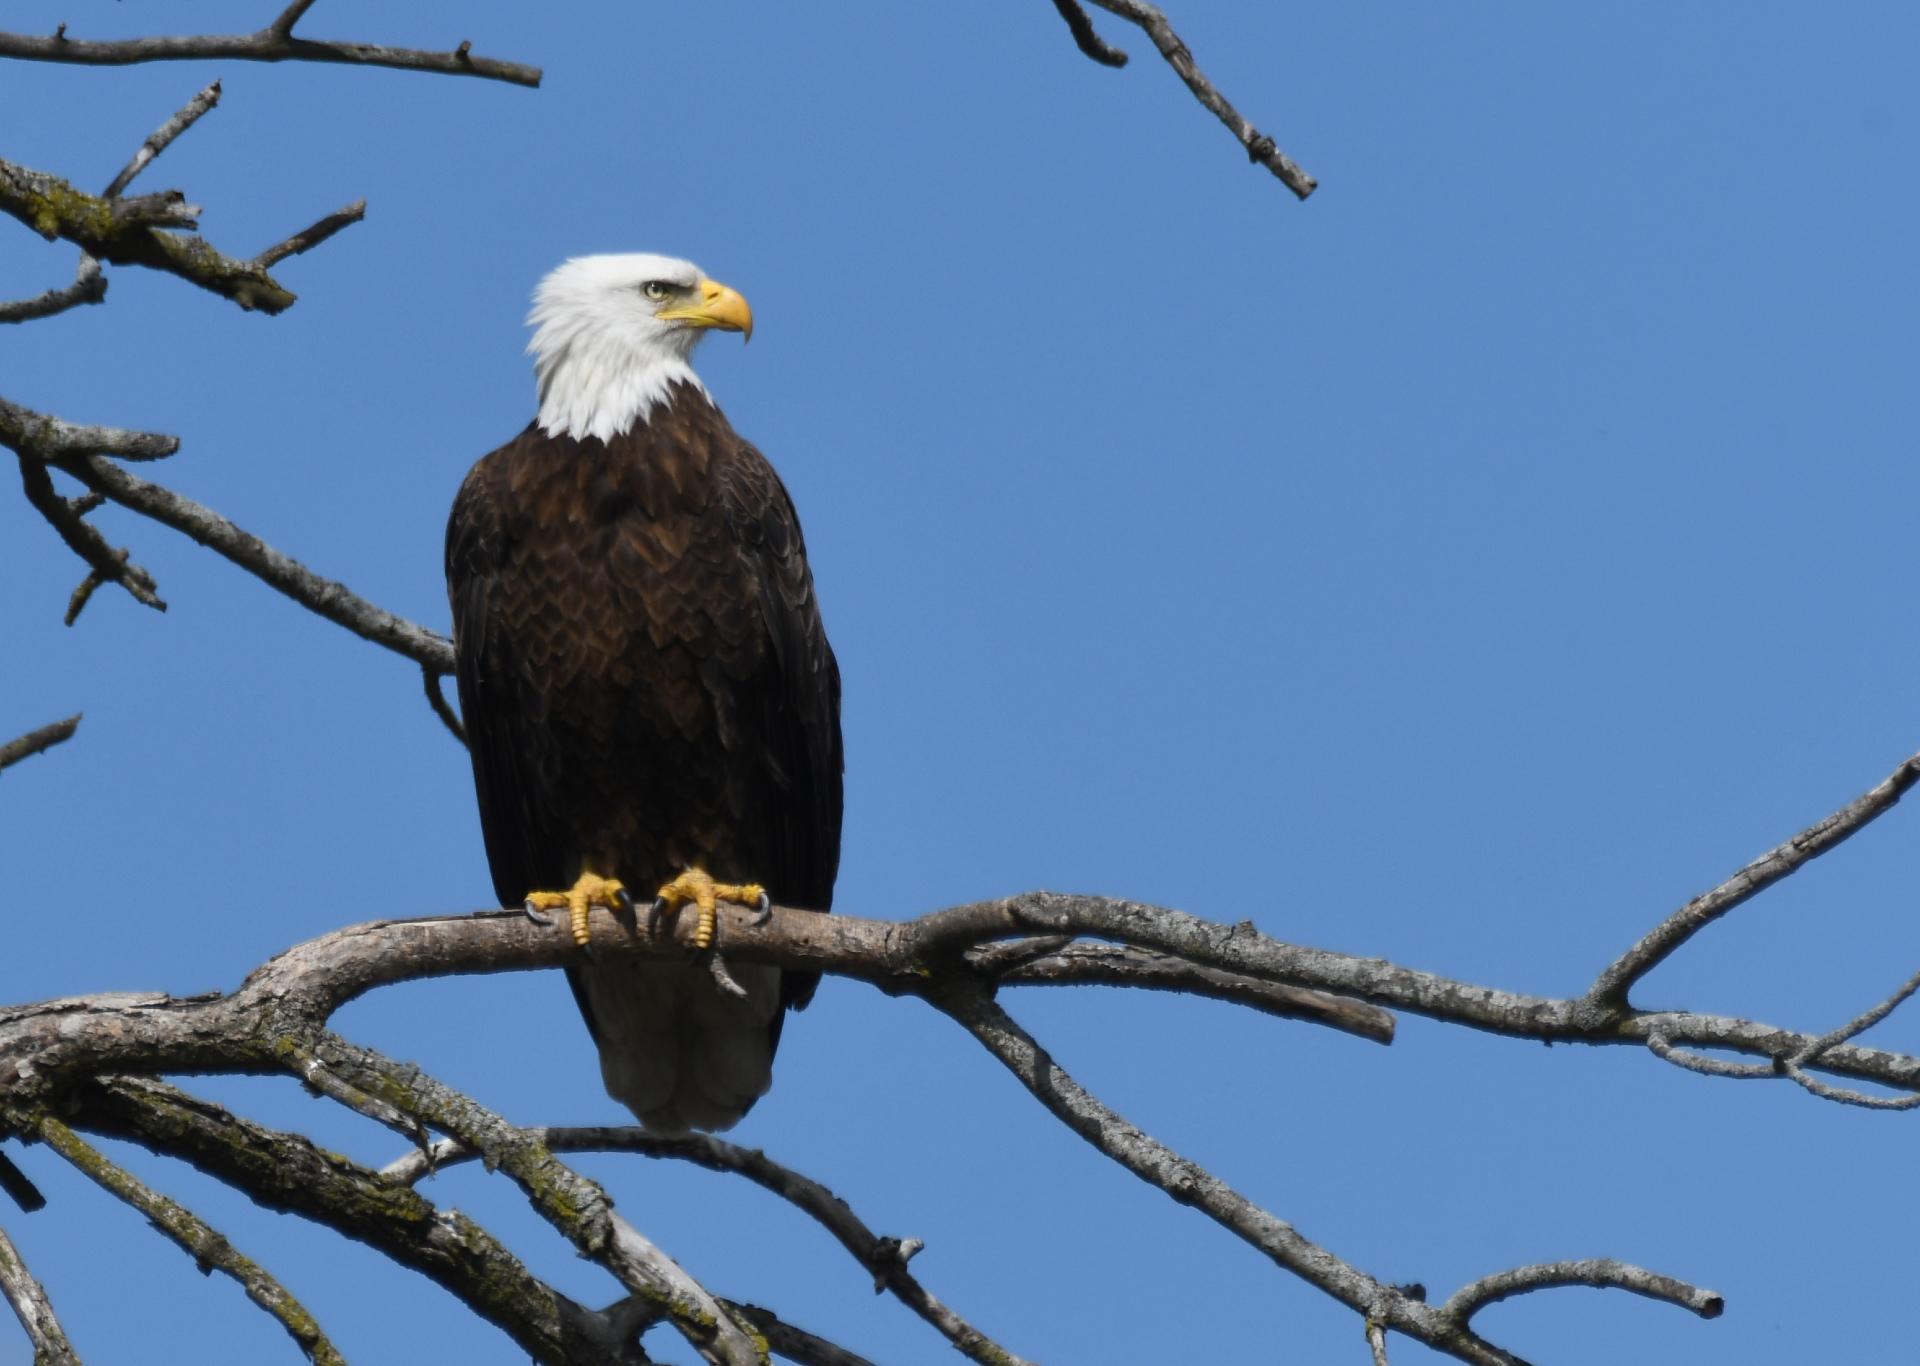 The Will County Forest Reserve District Eagle Watch will be held from 11 am to 3 pm on Saturday, January 8 at the Four Rivers Environmental Education Center in Channahon.  (Photo by Forest Preserve staff / Chad Merda)